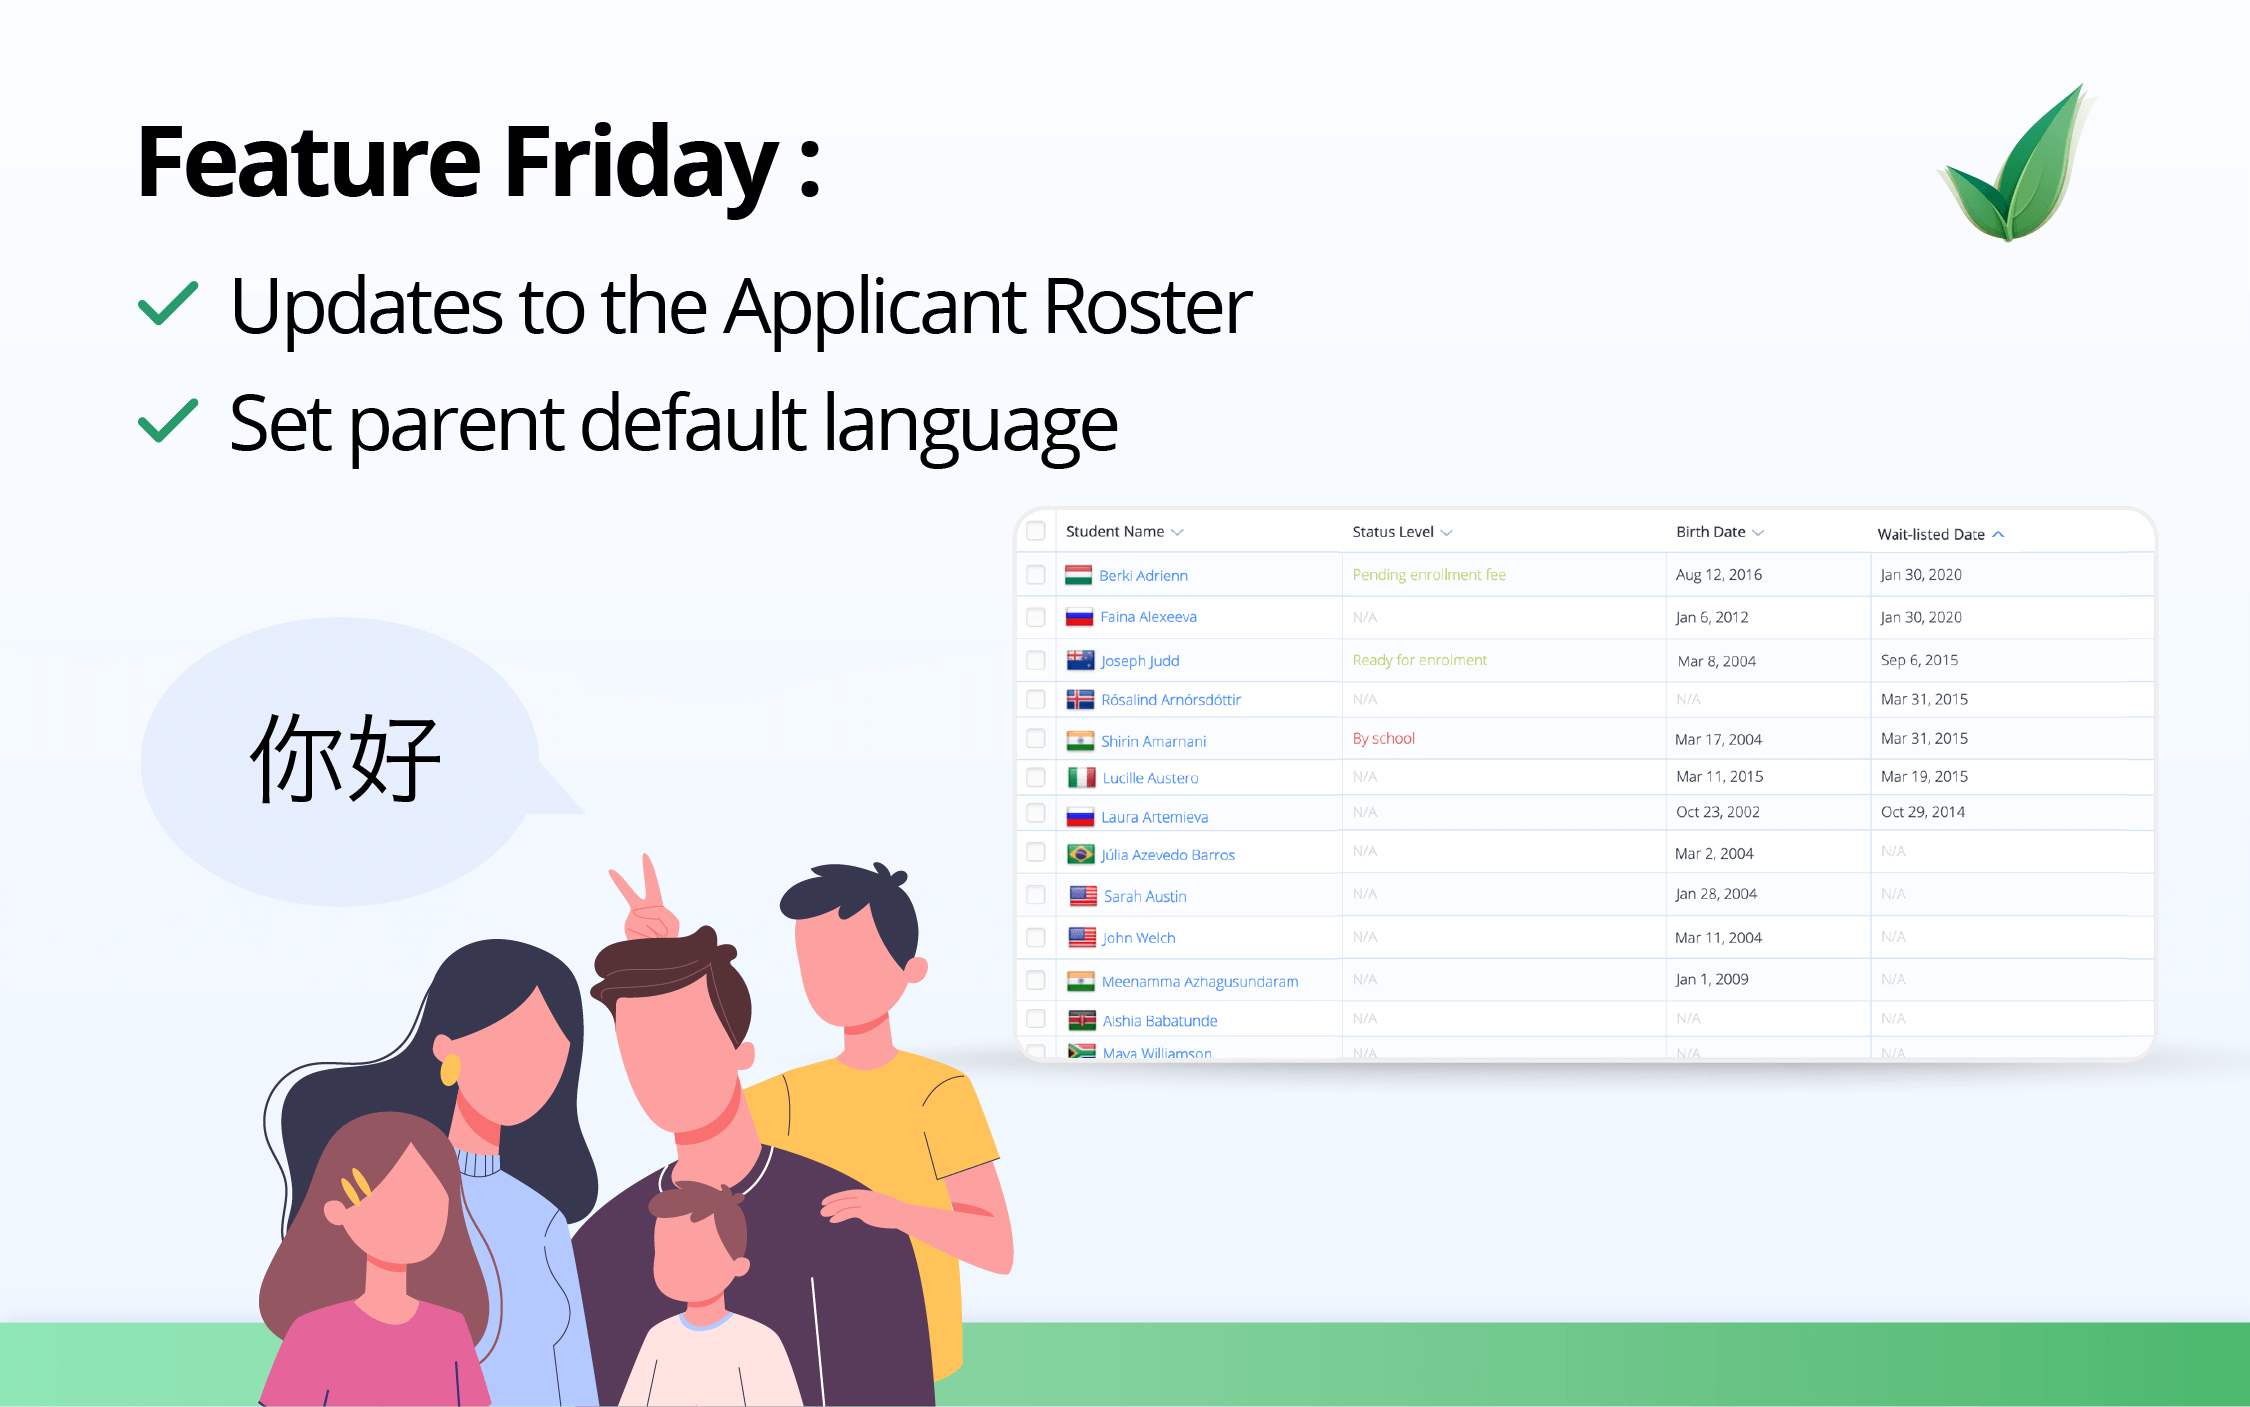 Feature Friday: Applicant Roster Updates and Parent Default Language